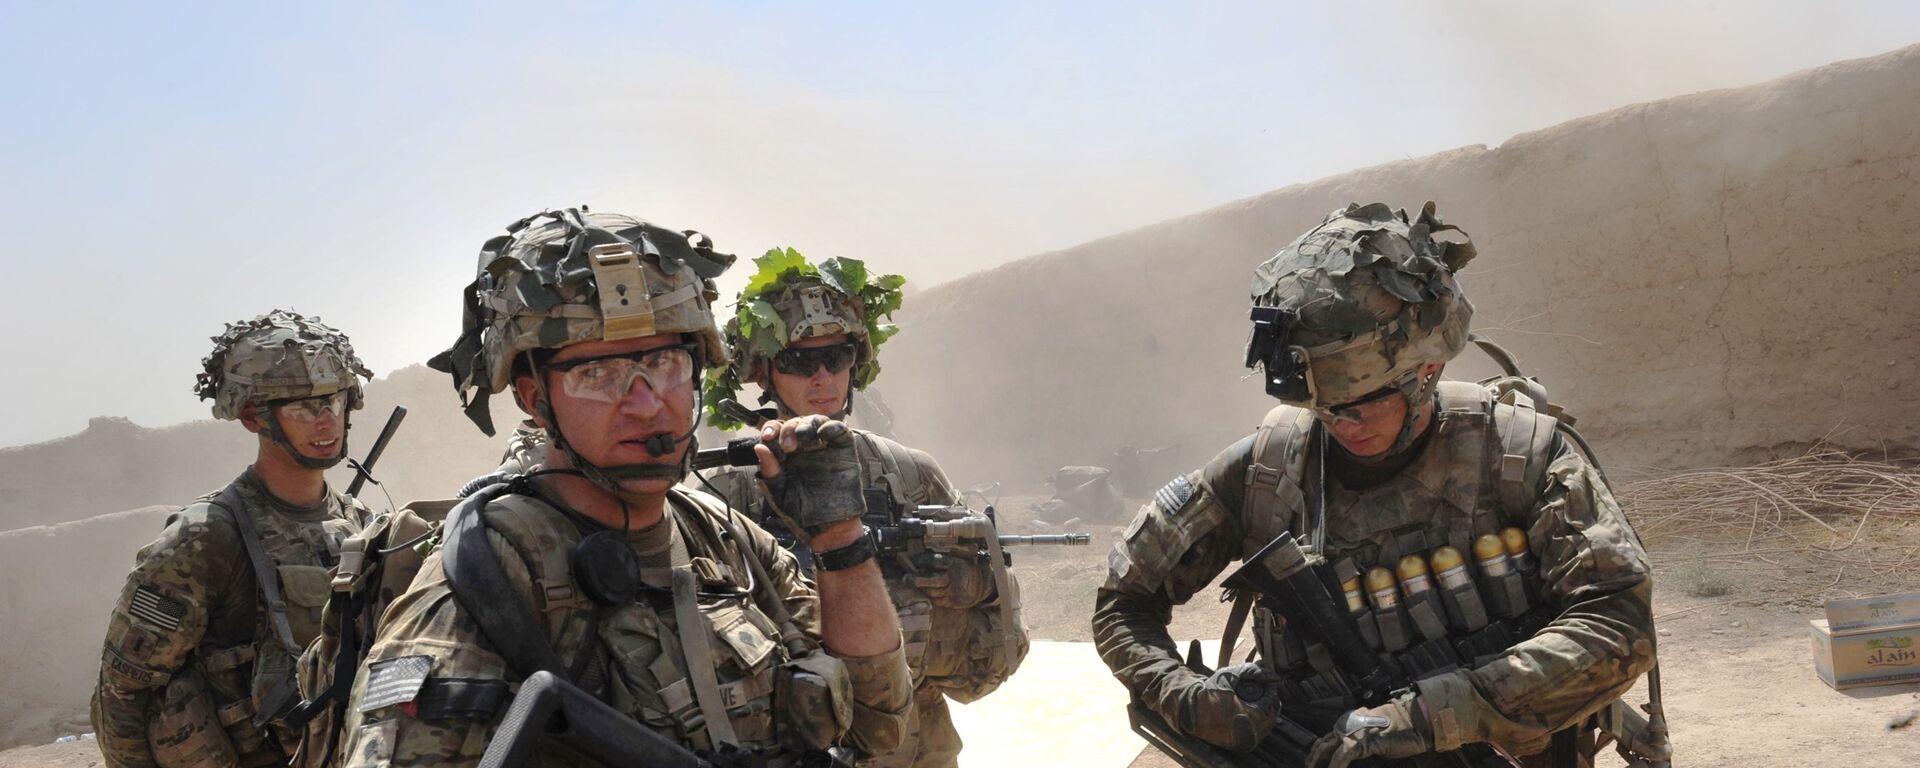 In this photo taken on August 5, 2011, US troops from the Charlie Company, 2-87 Infantry, 3d Brigade Combat Team under Afghanistan's International Security Assistance Force patrols Kandalay village following Taliban attacks on a joint US and Afghan National Army checkpoint protecting the western area of Kandalay village. - Sputnik International, 1920